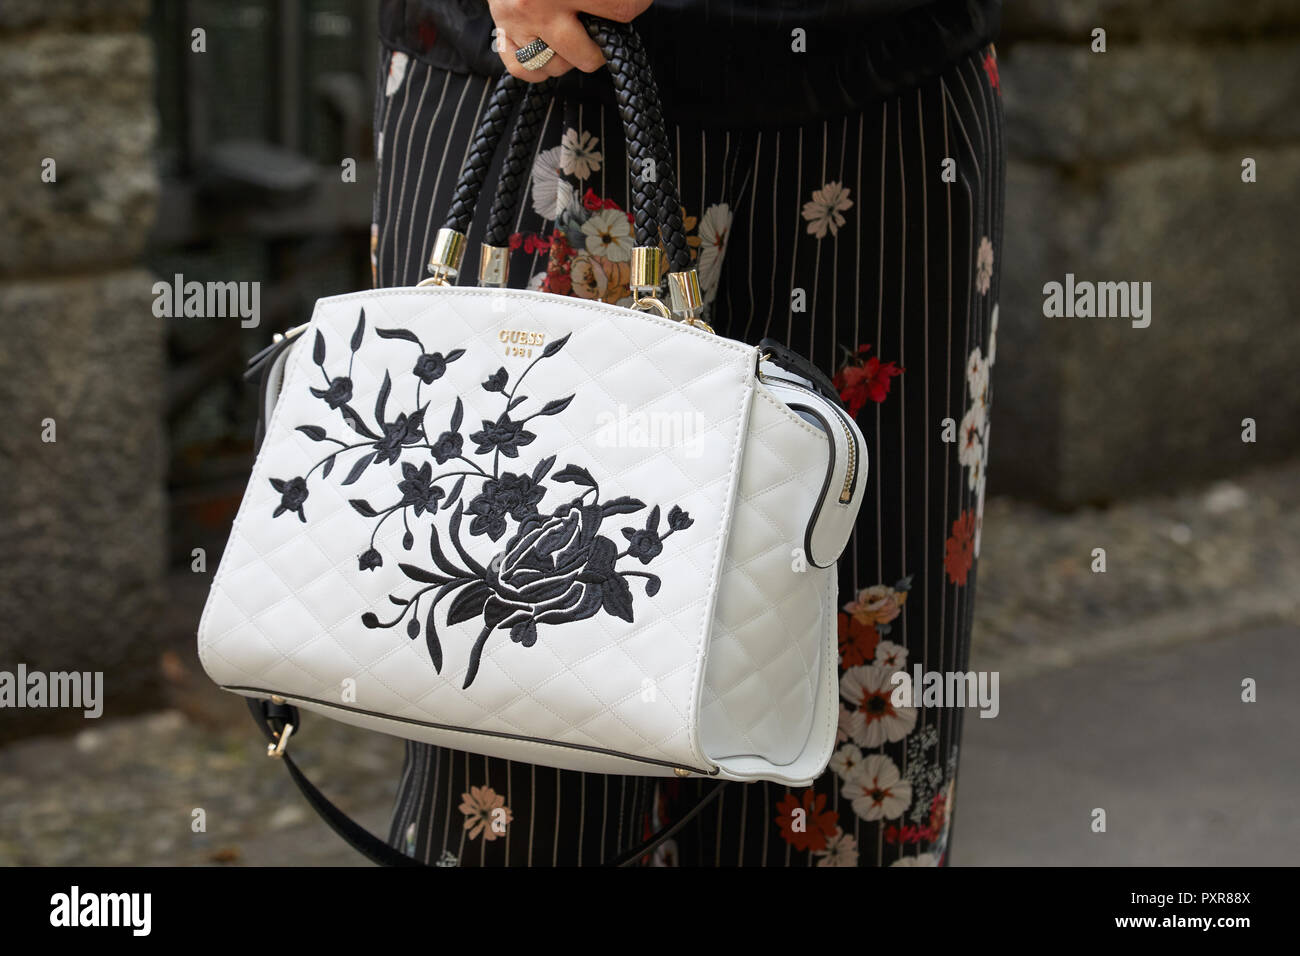 Guess Bag High Resolution Stock Photography and Images - Alamy